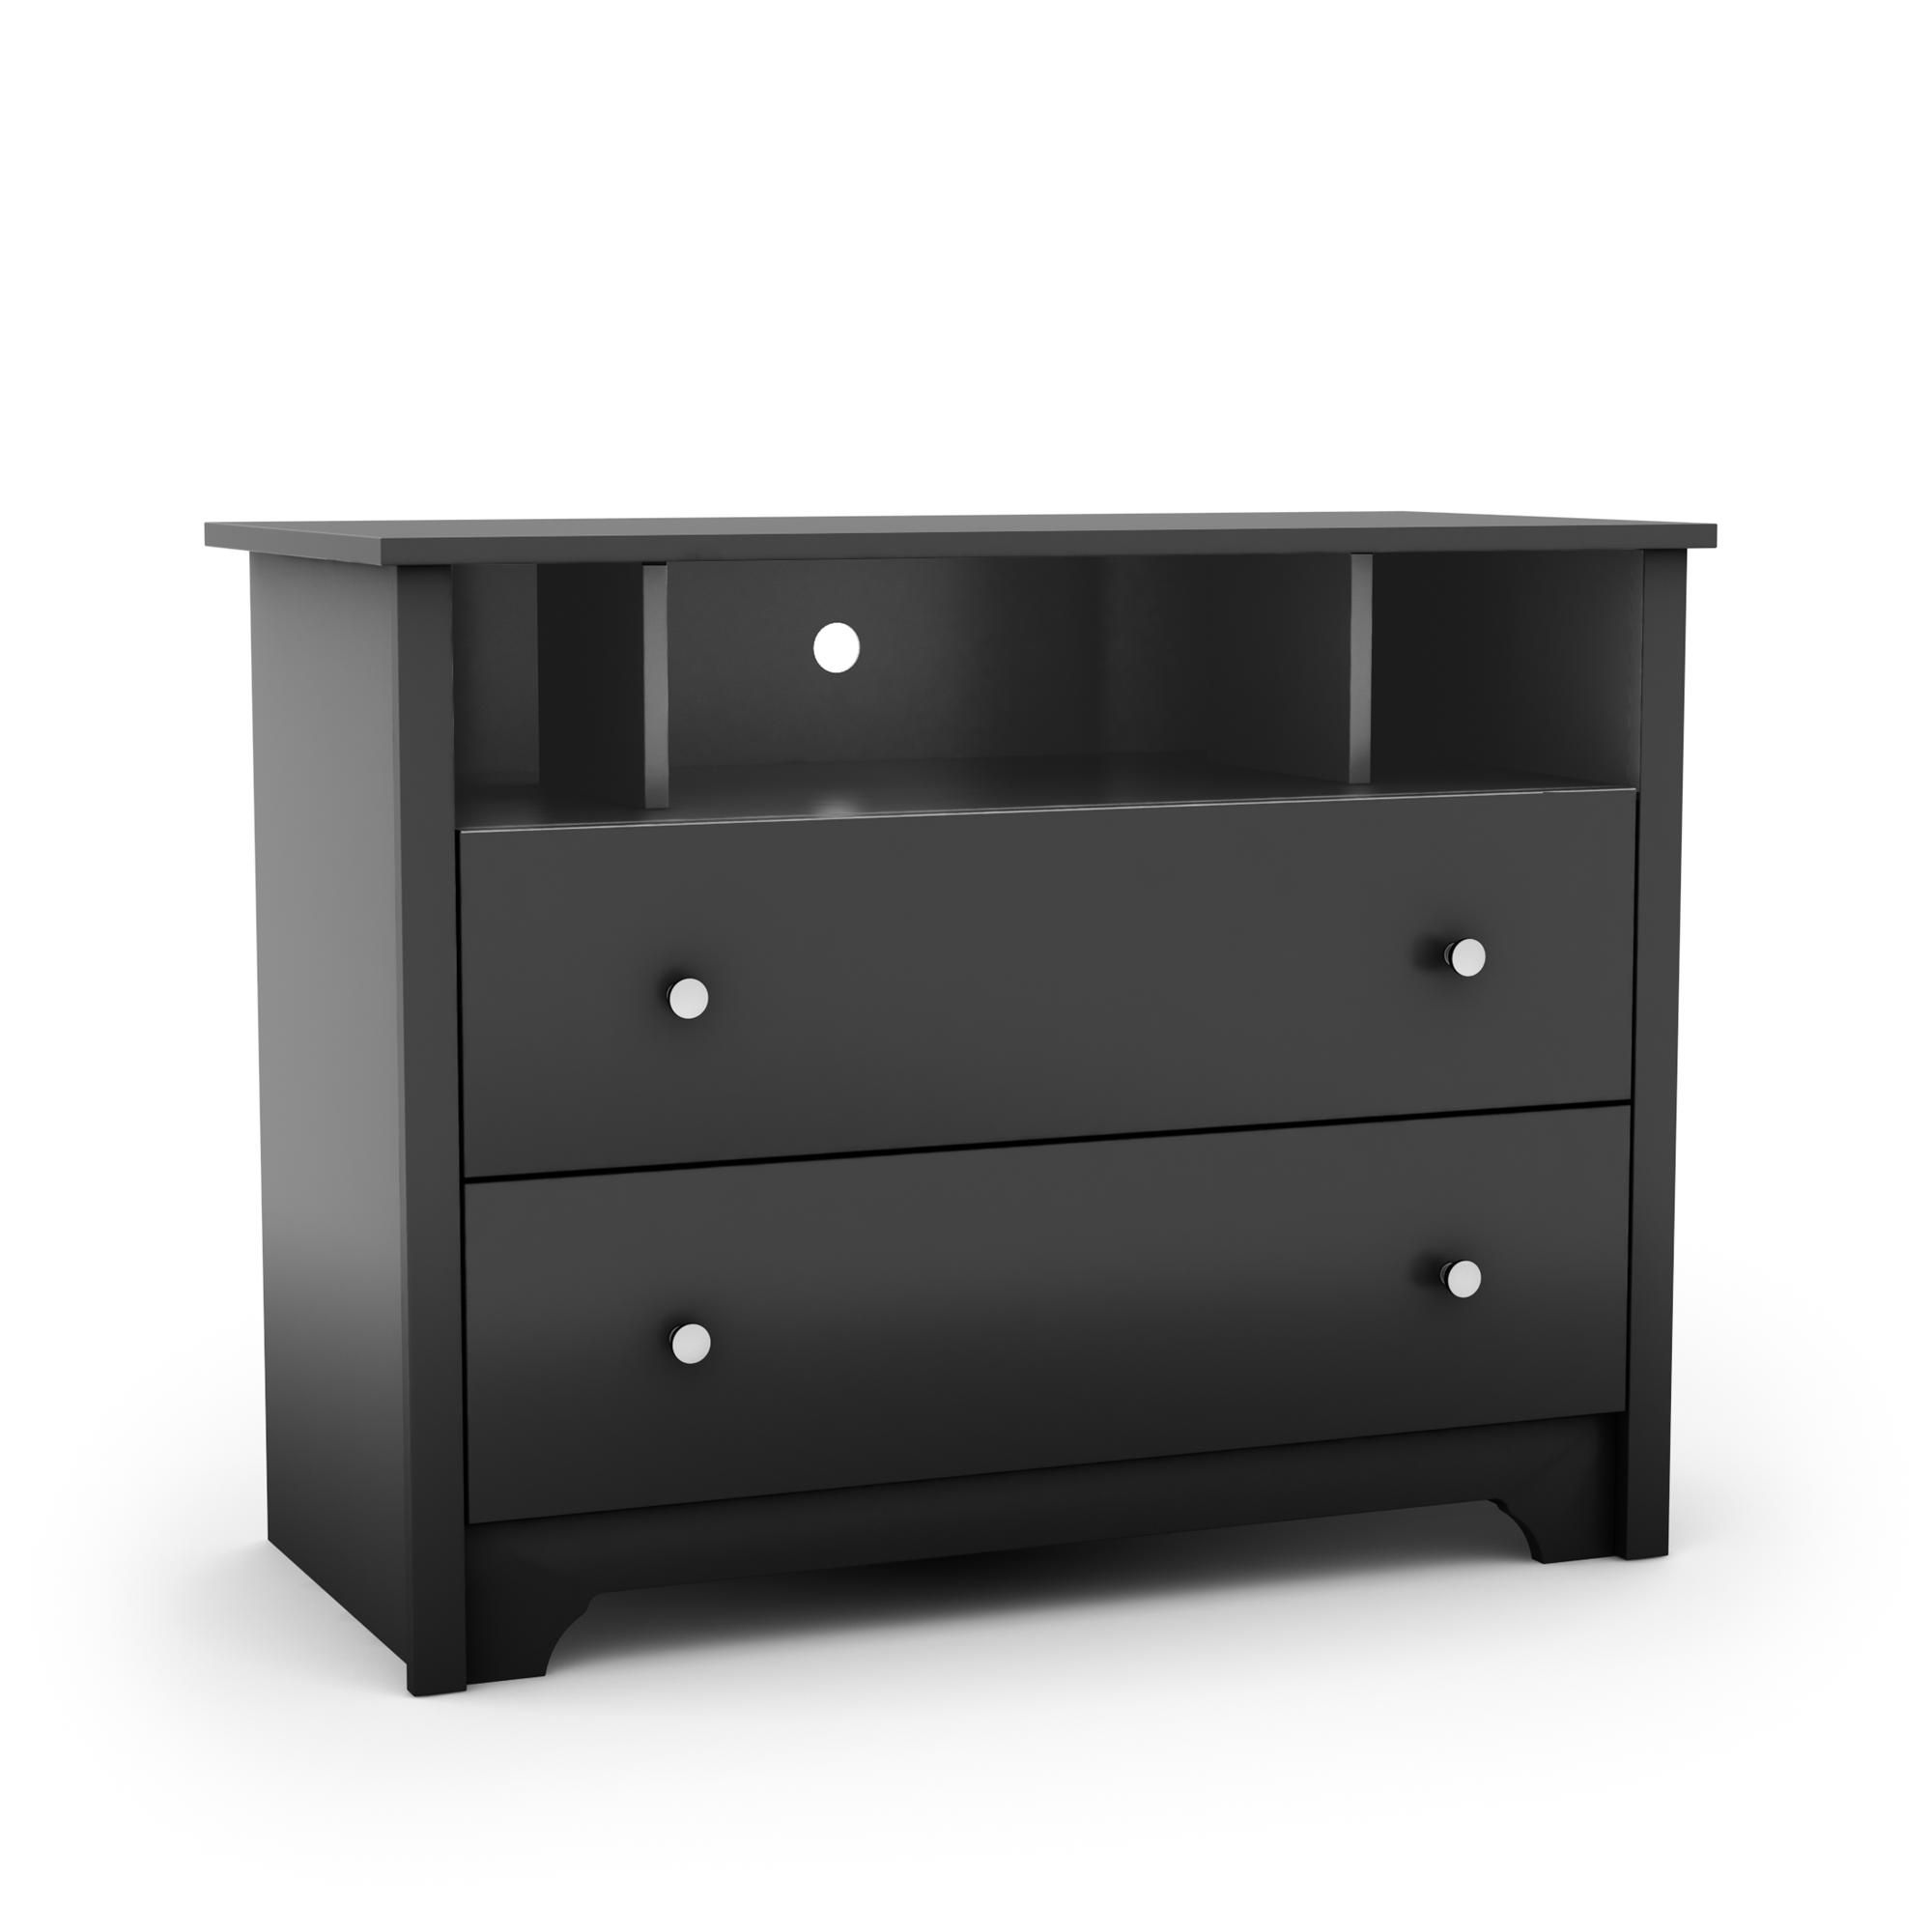 Famous Black Tv Stands With Drawers Within Square Black Tv Stand With Storage Drawers And Shelves Of Cool Tv (View 1 of 20)